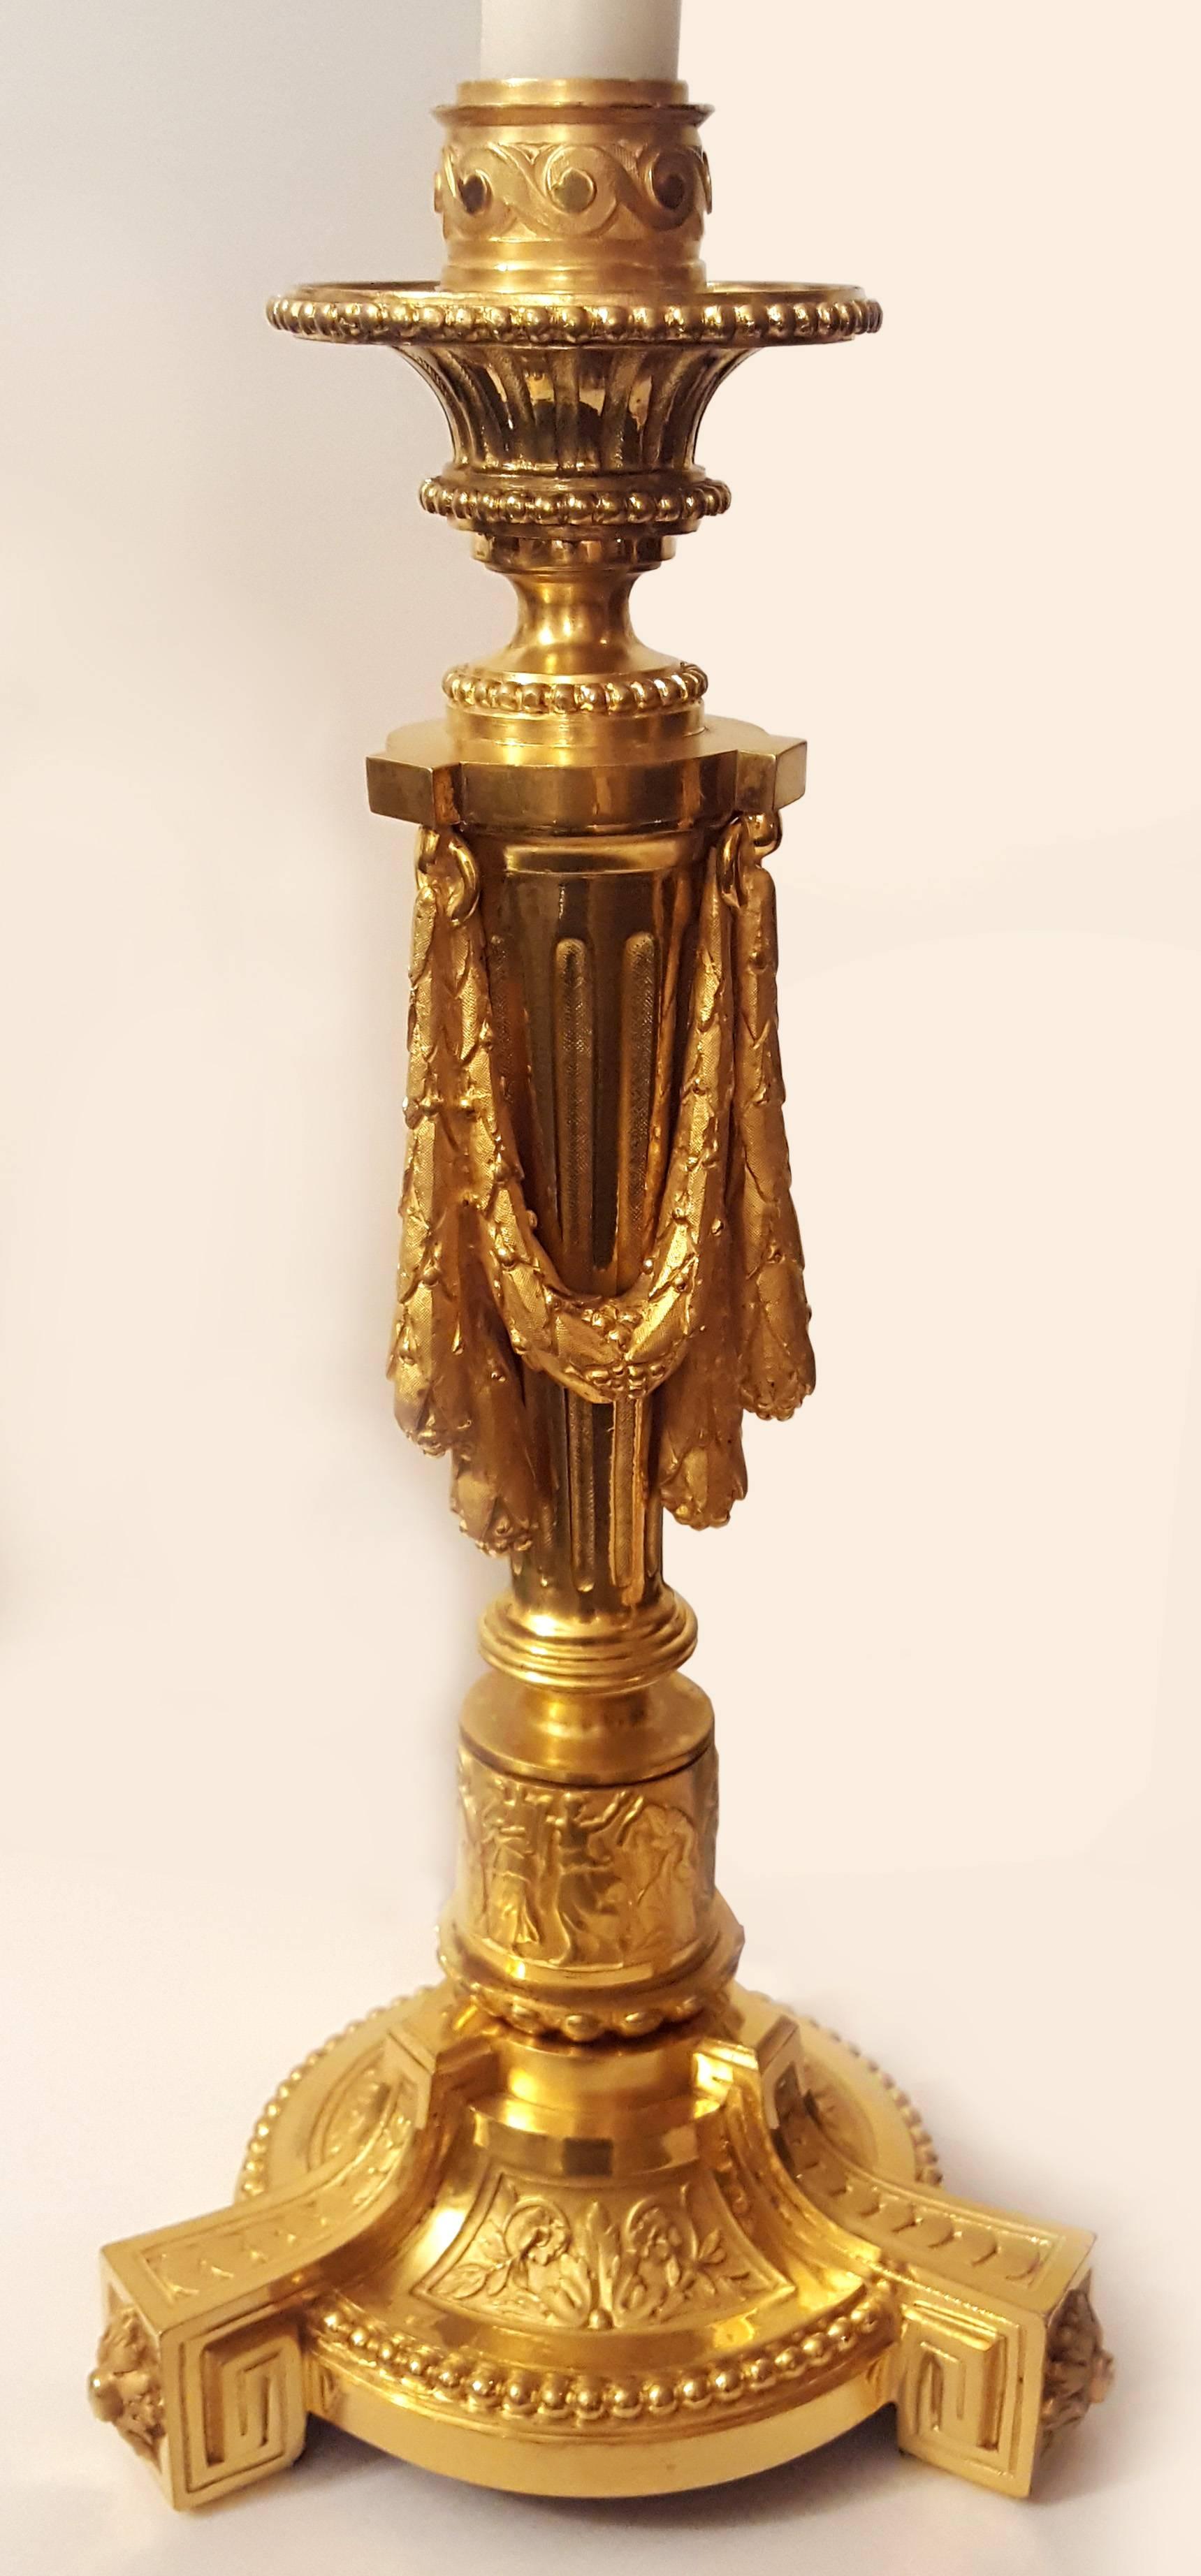 A pair of massive French gilt ormolu tripod candlesticks, mid-19th century.
Adorned with flowers, a Greek column with three garlands, a circumferential relief with vivid figures in ancient Greek dresses, one of them holding a lyre, meanders.